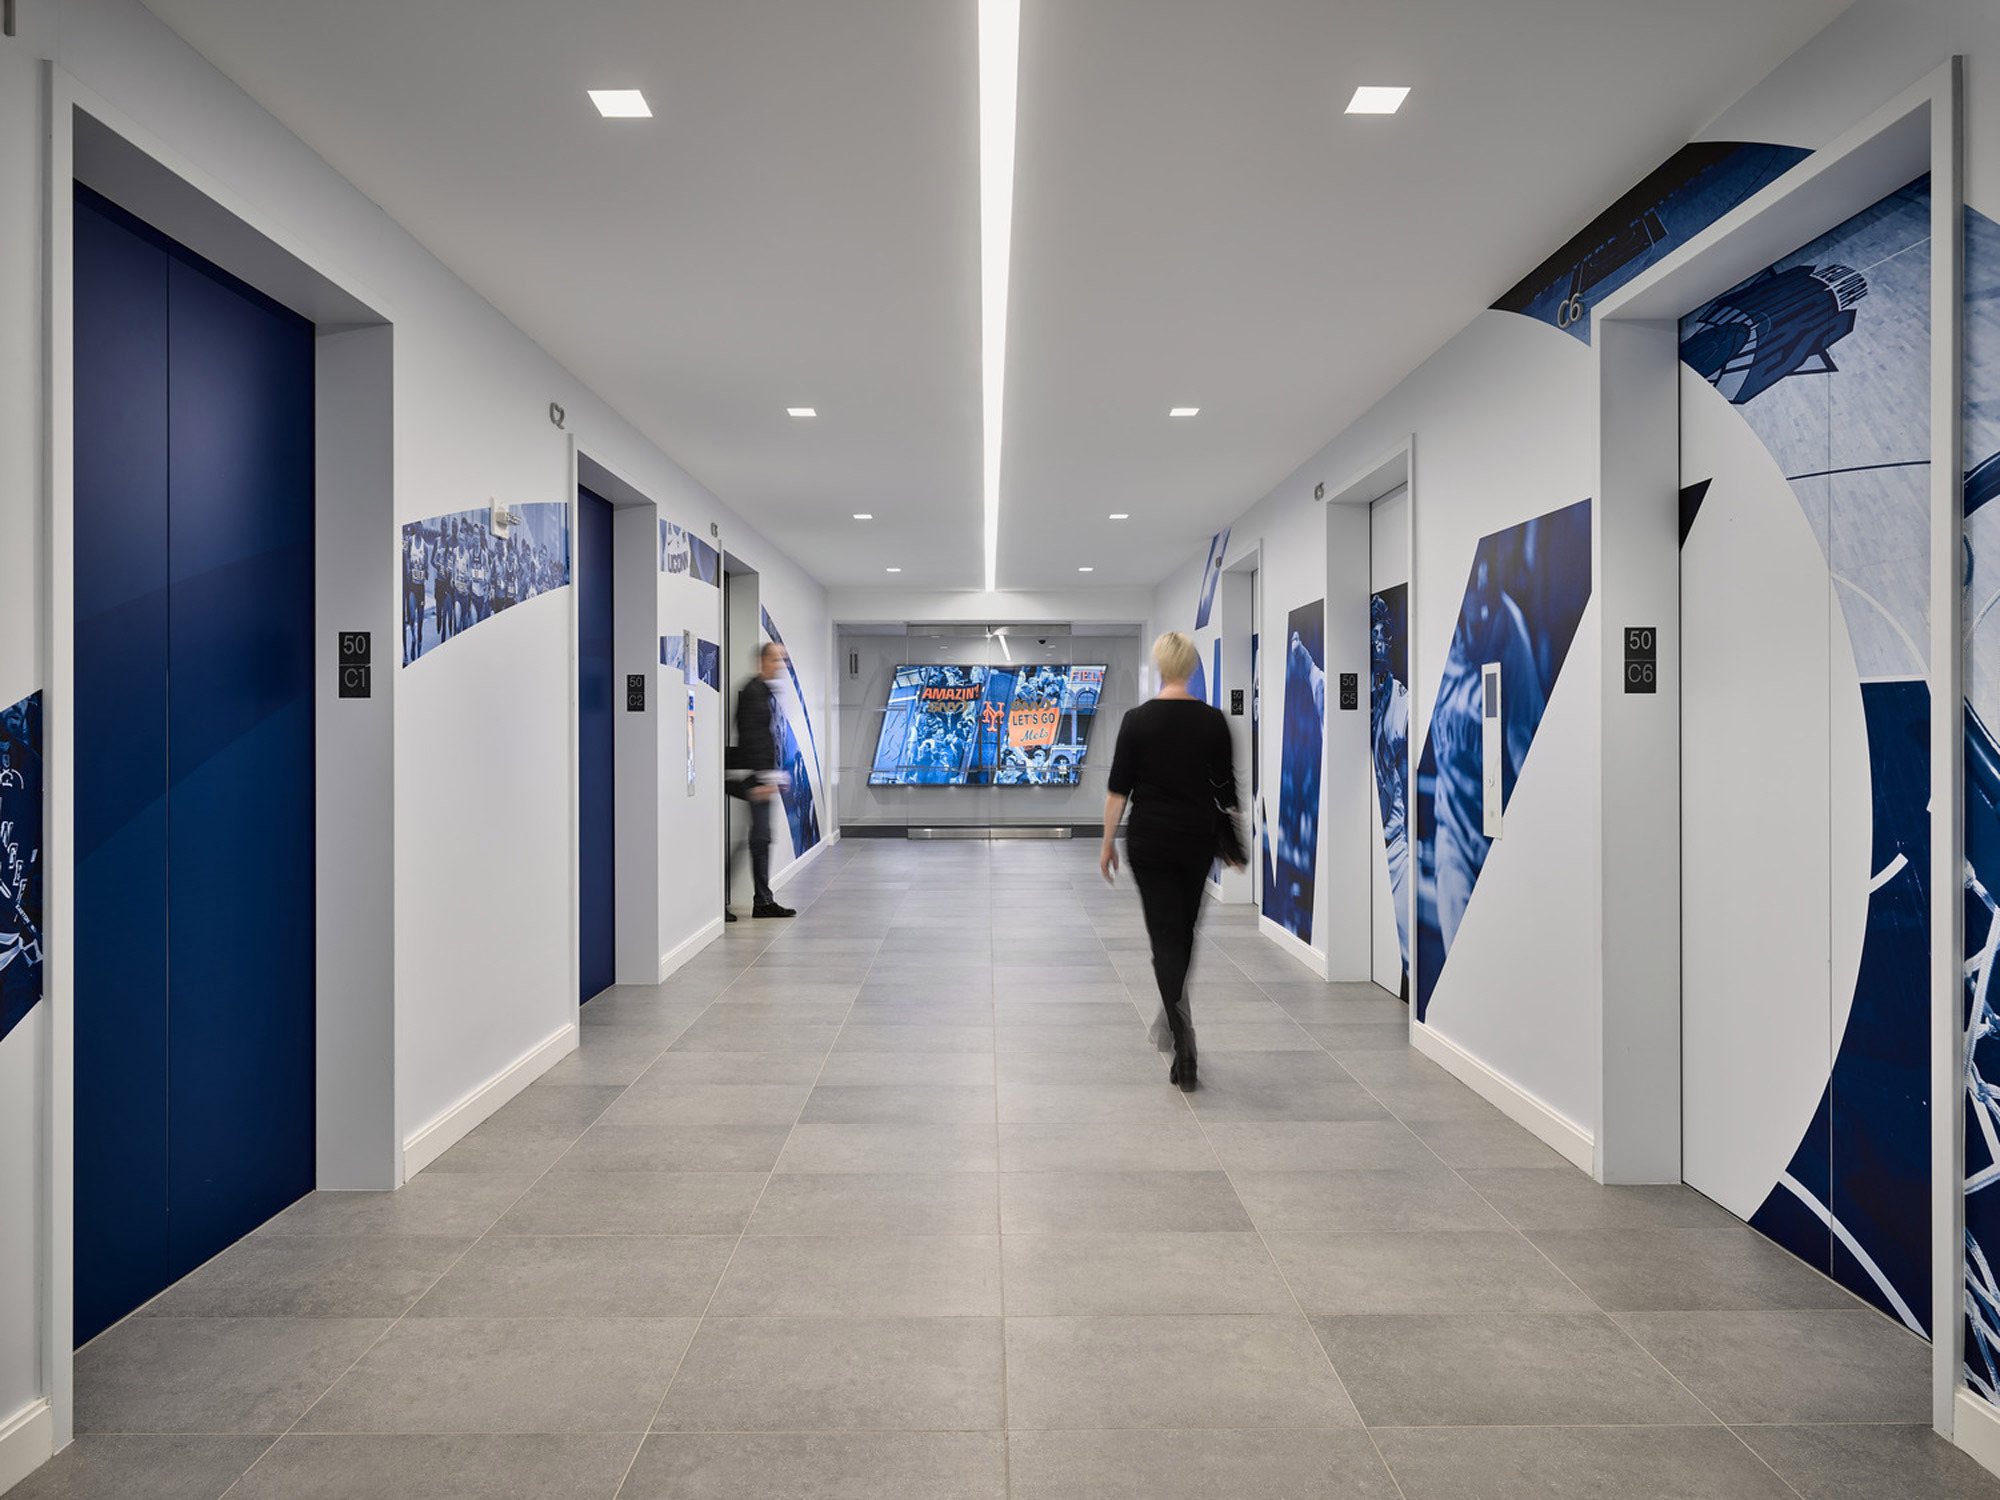 A modern corridor with polished grey floor tiles and white walls adorned by geometric patterns and vivid blue graphics. Mirrored doors interspersed with windows leading to offices, providing a blend of privacy and openness. A figure strides through, enhancing the sense of workplace dynamism.